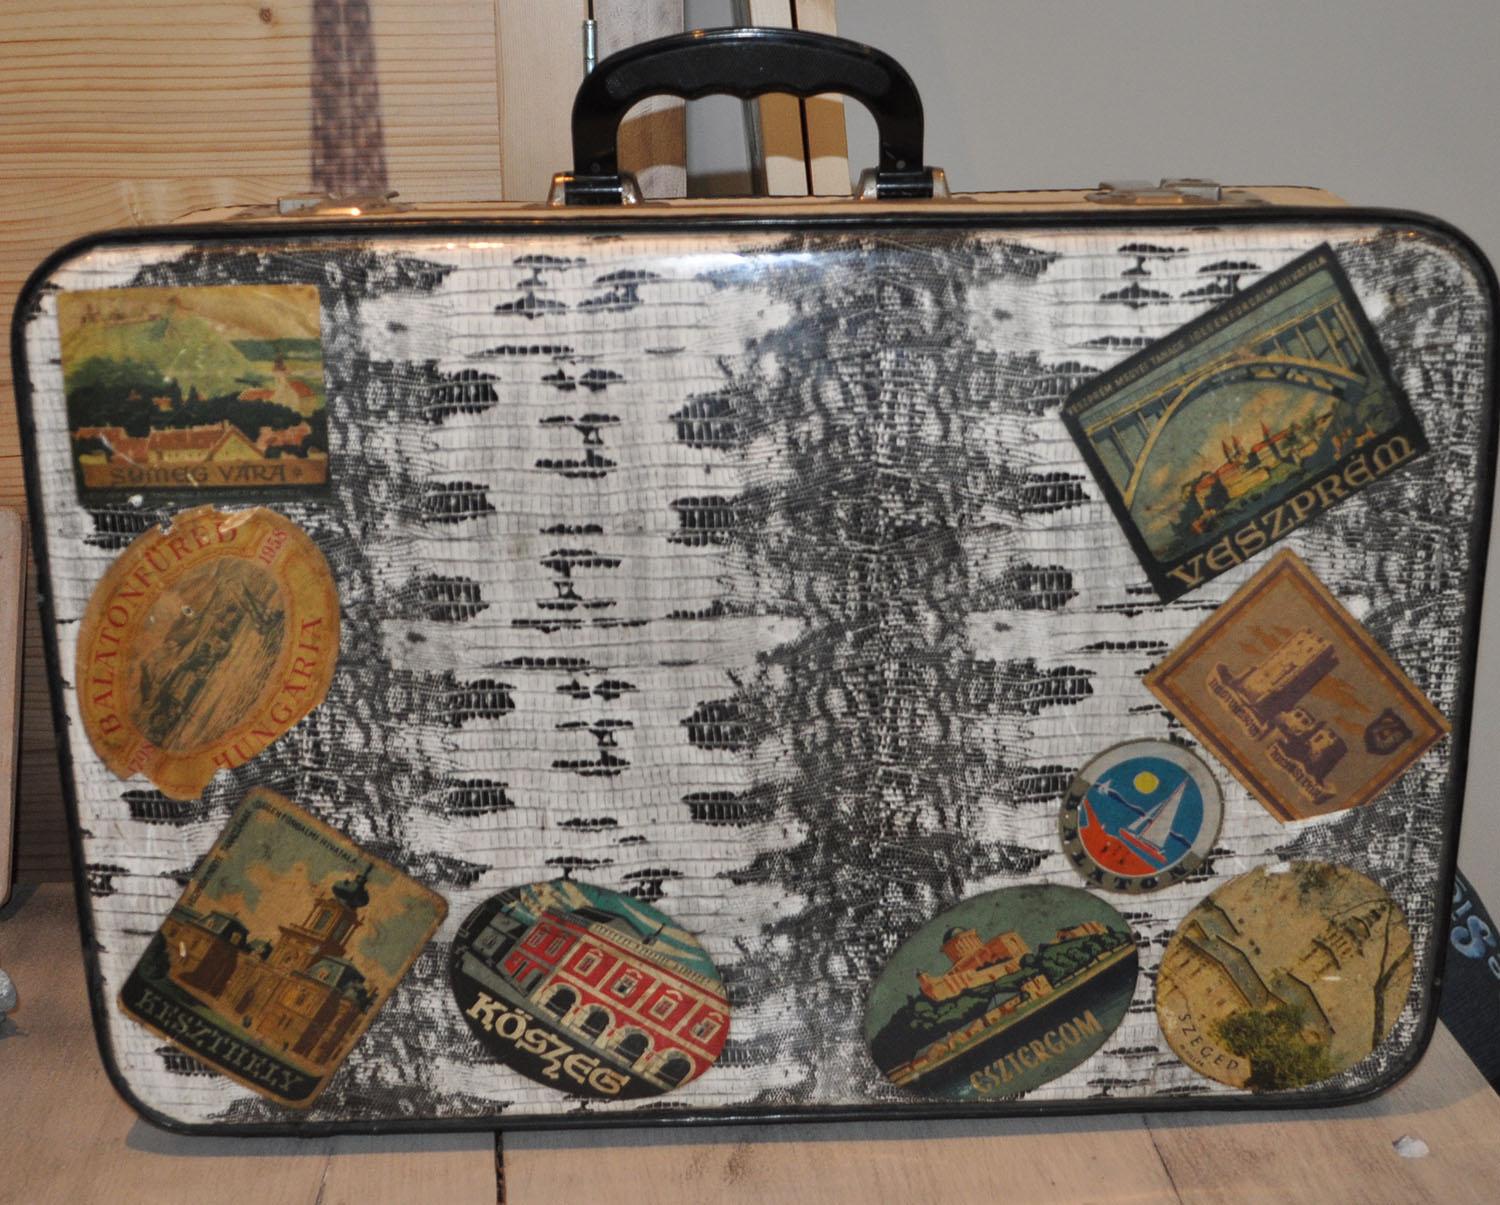 Very unique vintage suitcase.
Displays great, even more impressive in person!
Just imagine all the places this suitcase has been, we found it in a small little town in Hungary.